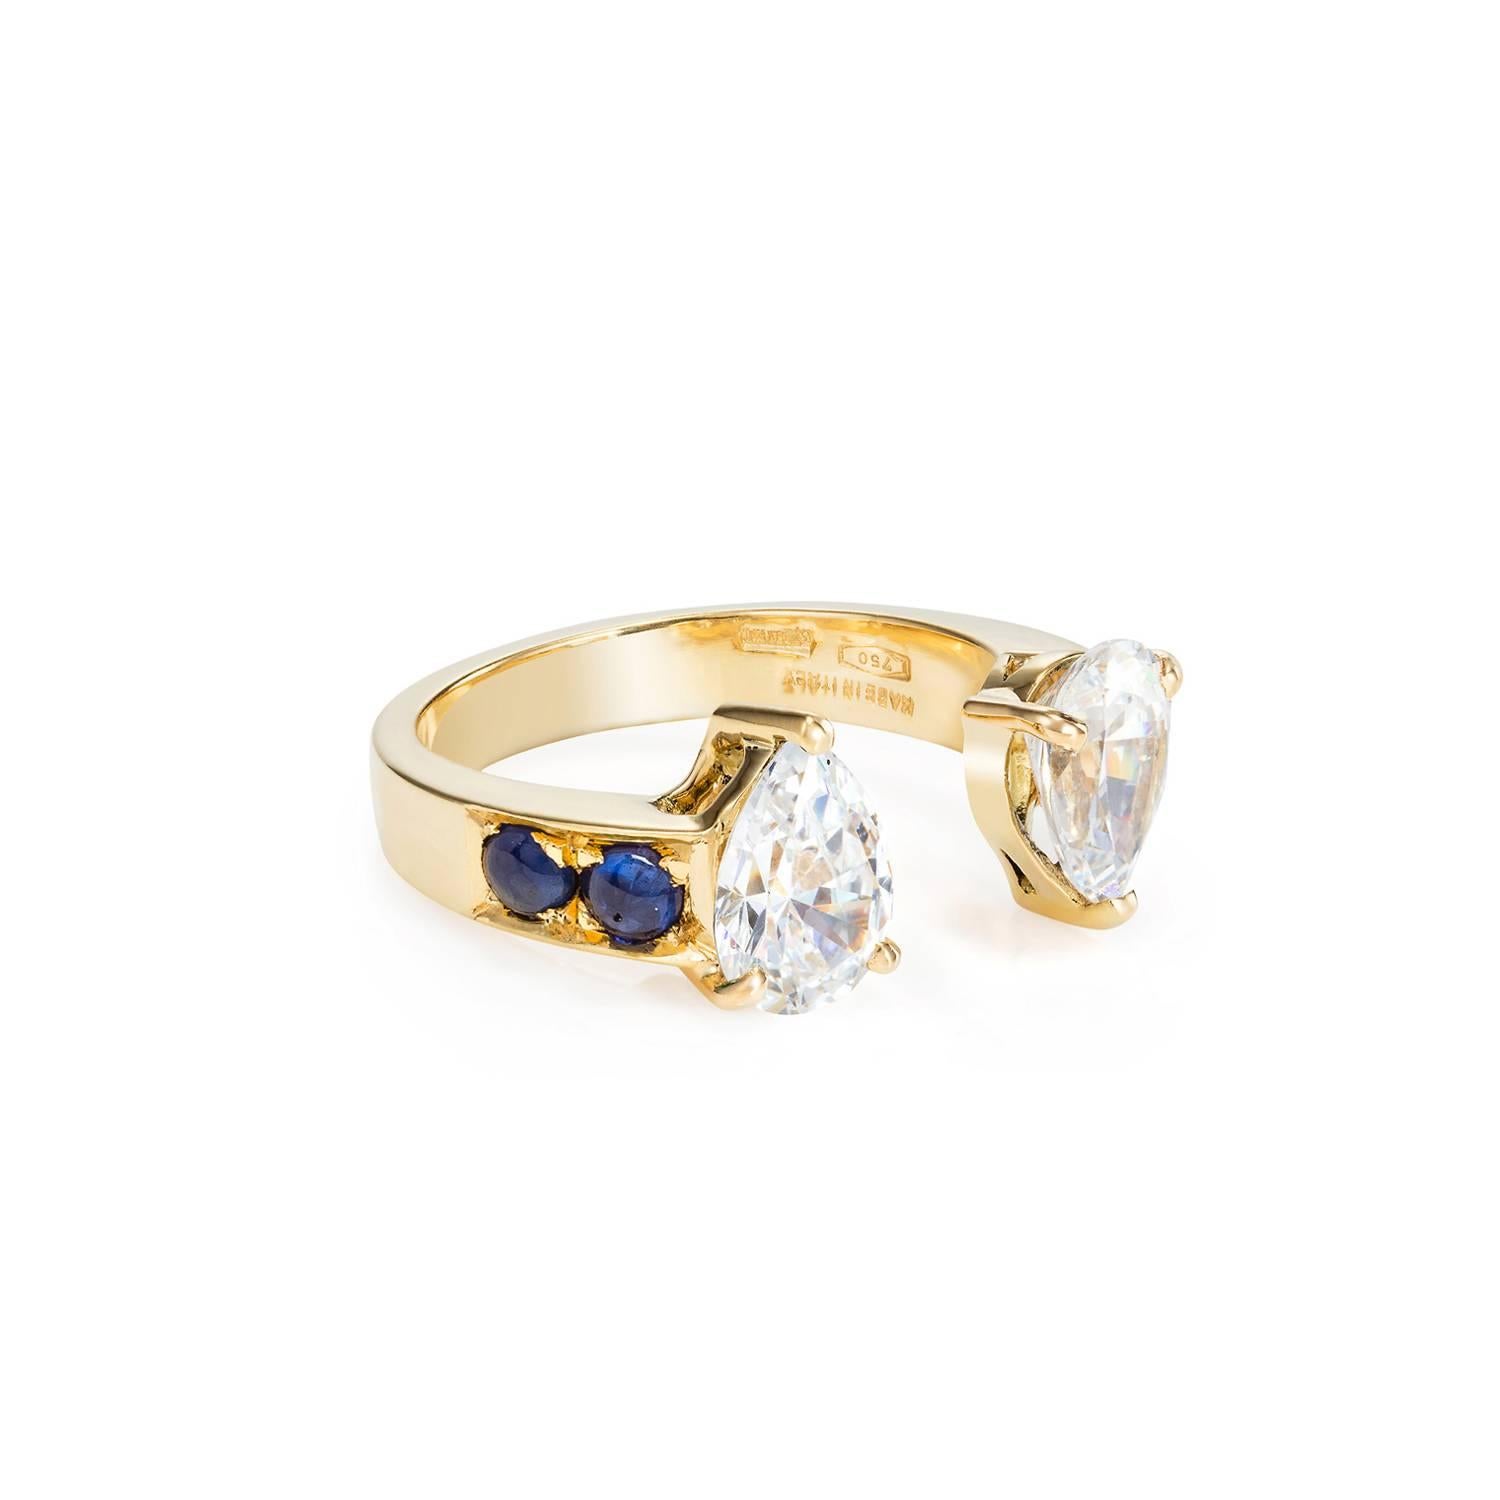 This DUBINI ring from the 'Theodora' collection features white topaz drops with sapphire cabochons set in 18K yellow gold. 

This ring may be ordered in any size with a lead time of 3-4 weeks.

Diamonds can be used instead of White Zircon - PRICE